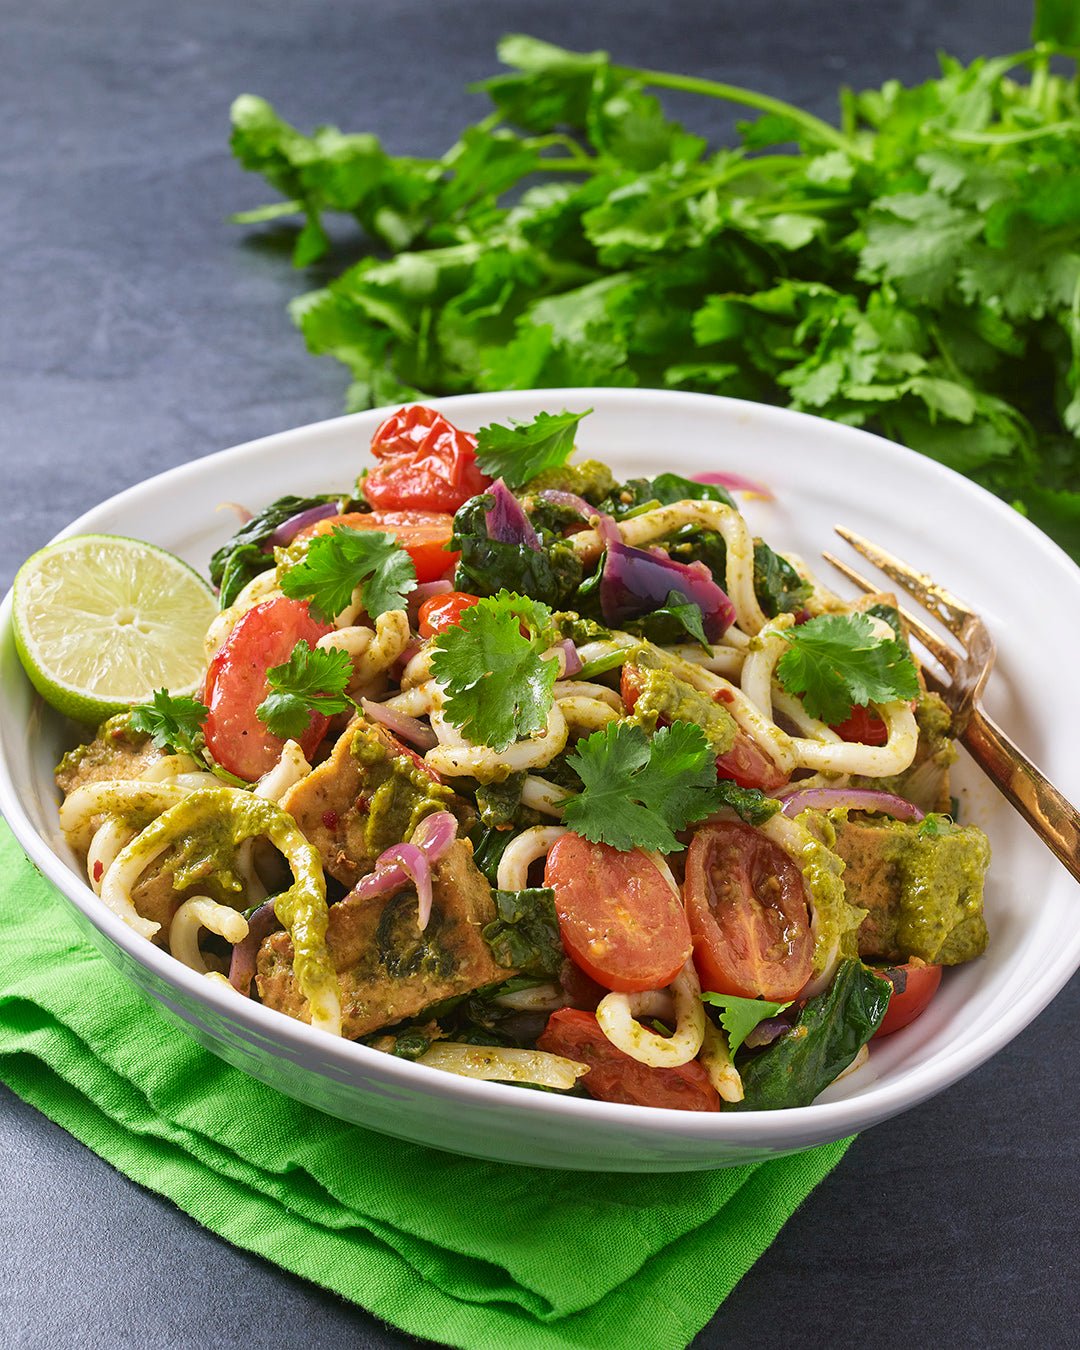 Pesto Marinated Tofu Noodles with Spinach